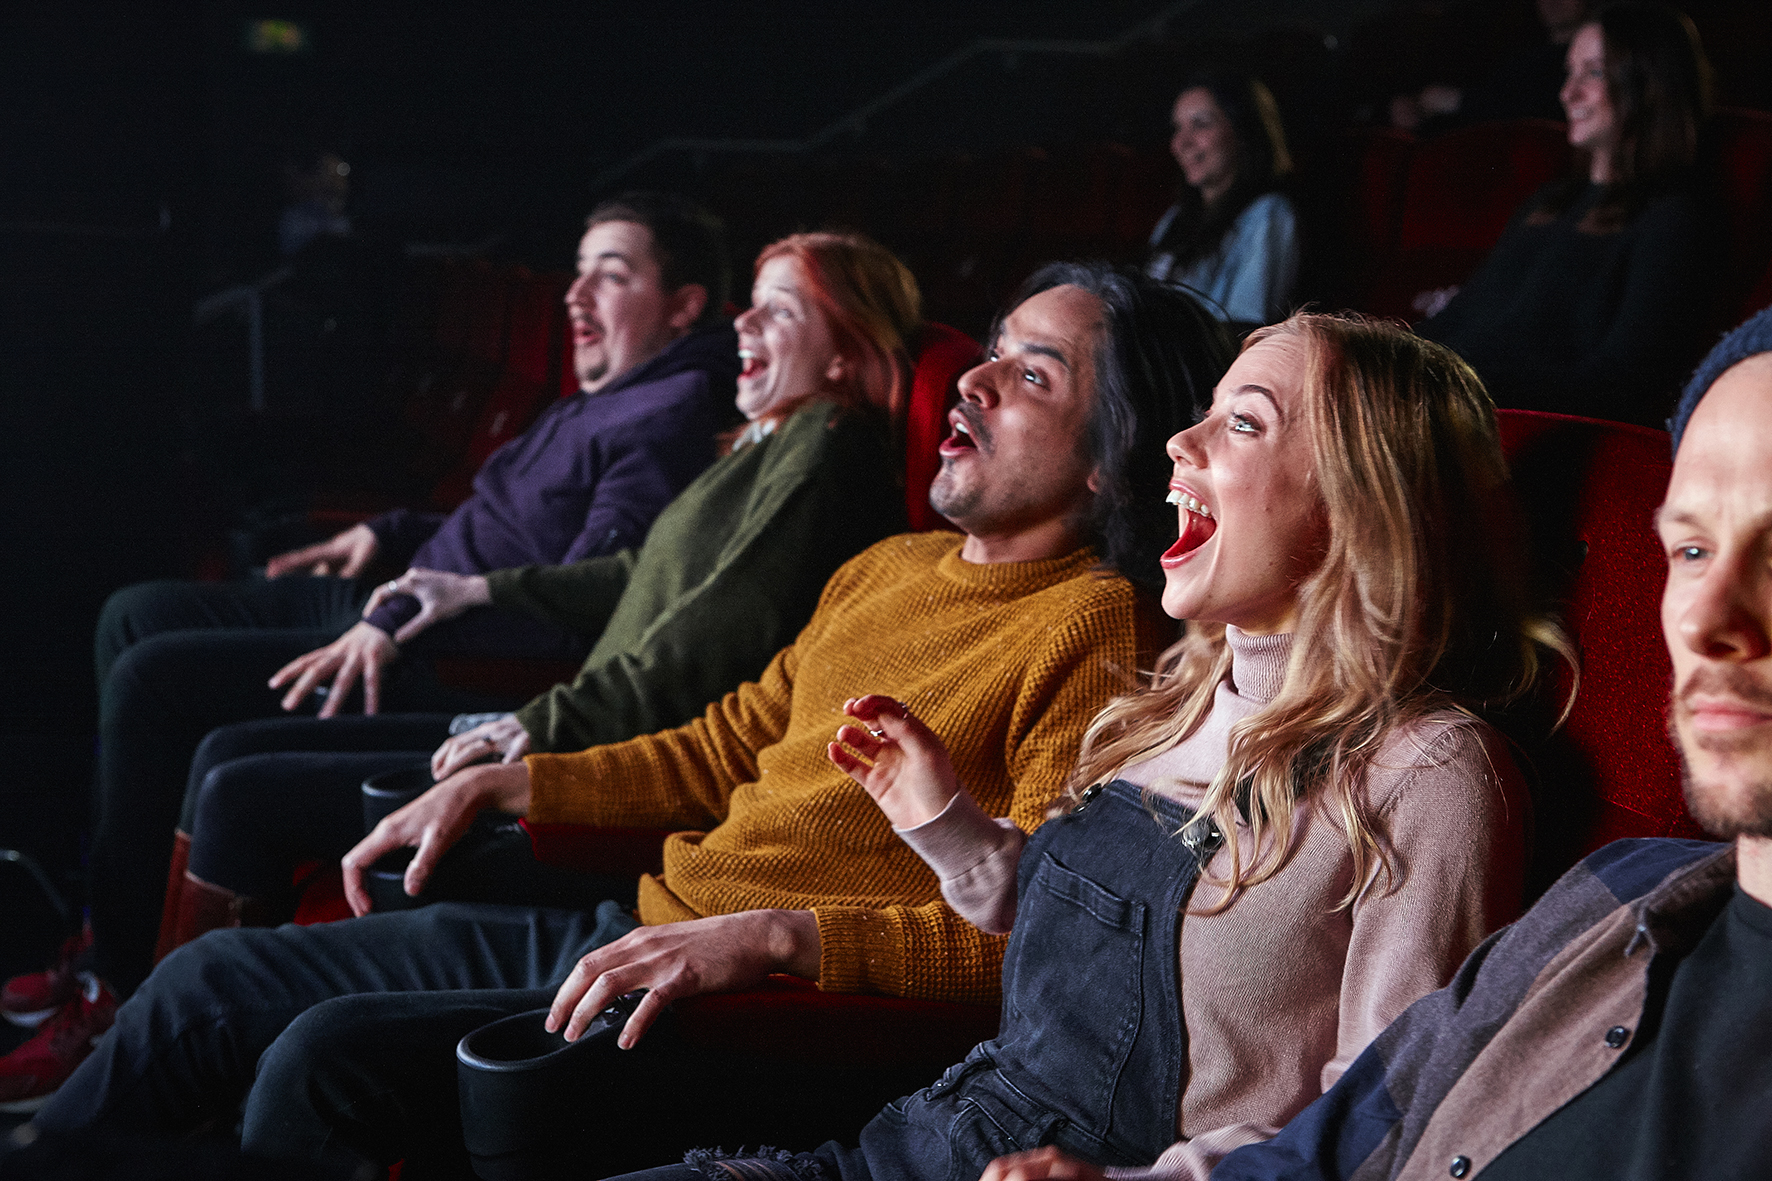 The immersive movie theatre uses high-tech motion seats and special effects...